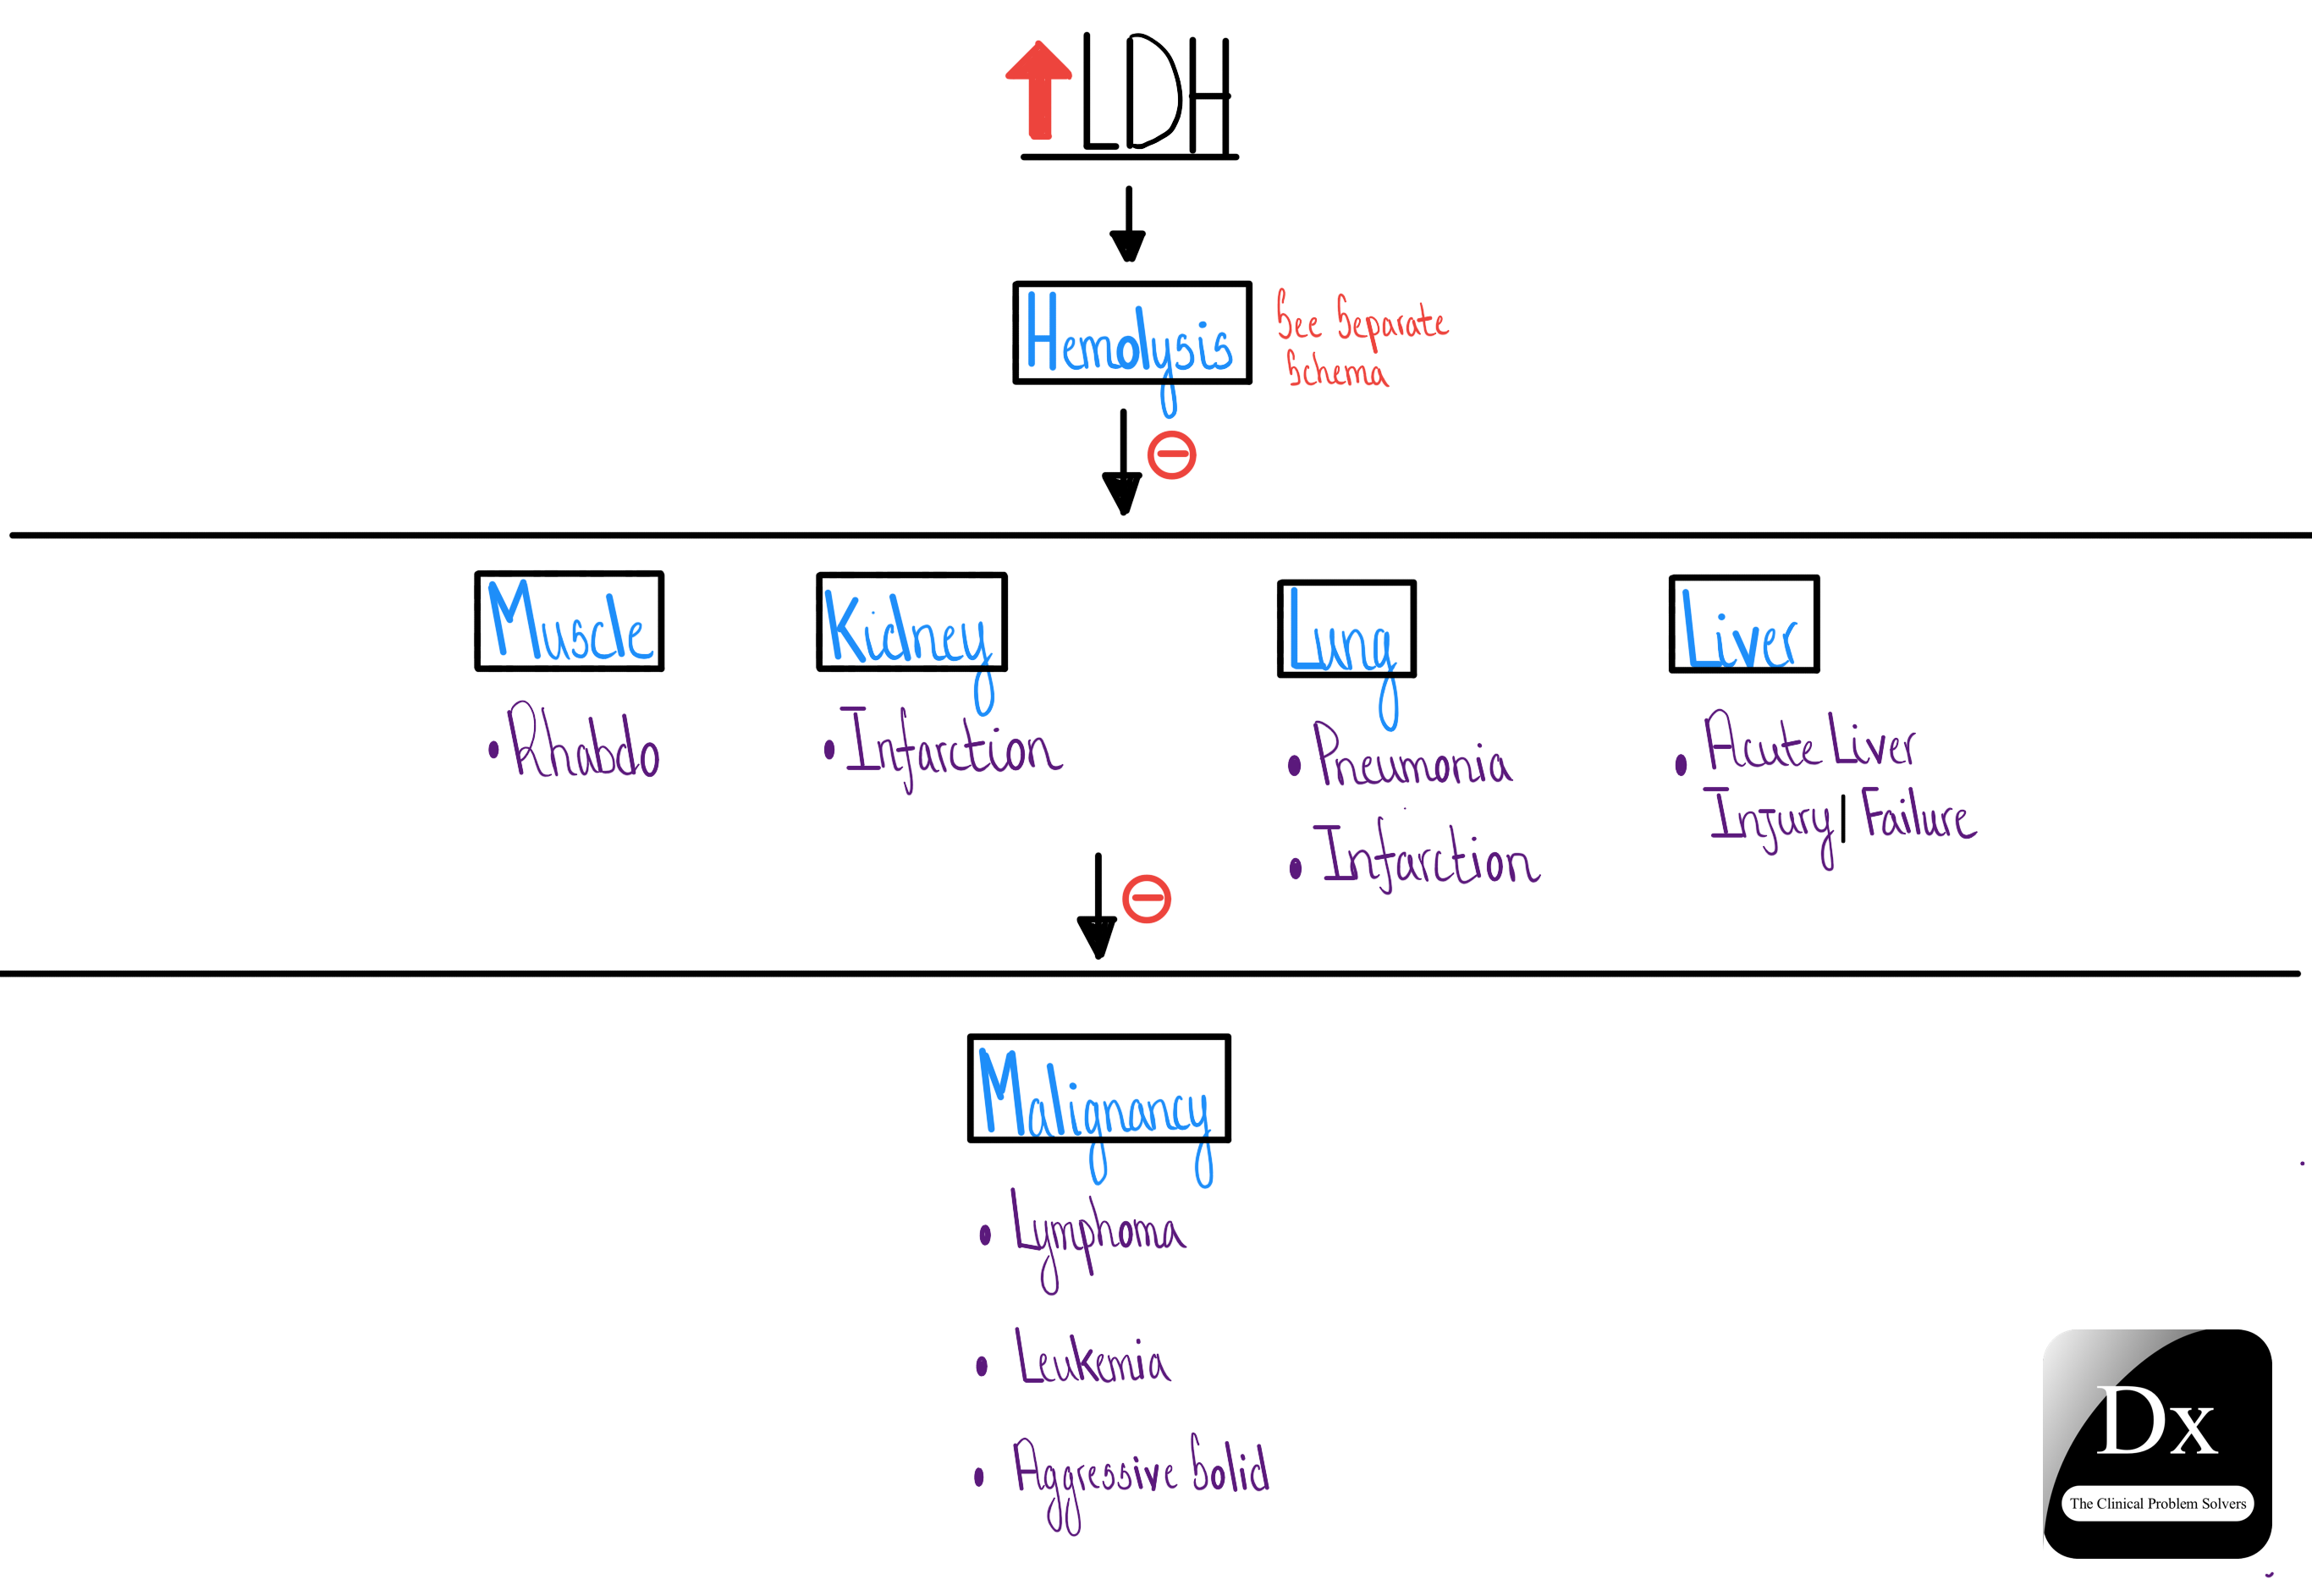 Dx Schema - Lactate Dehydrogenase - LDH - The Clinical Problem Solvers